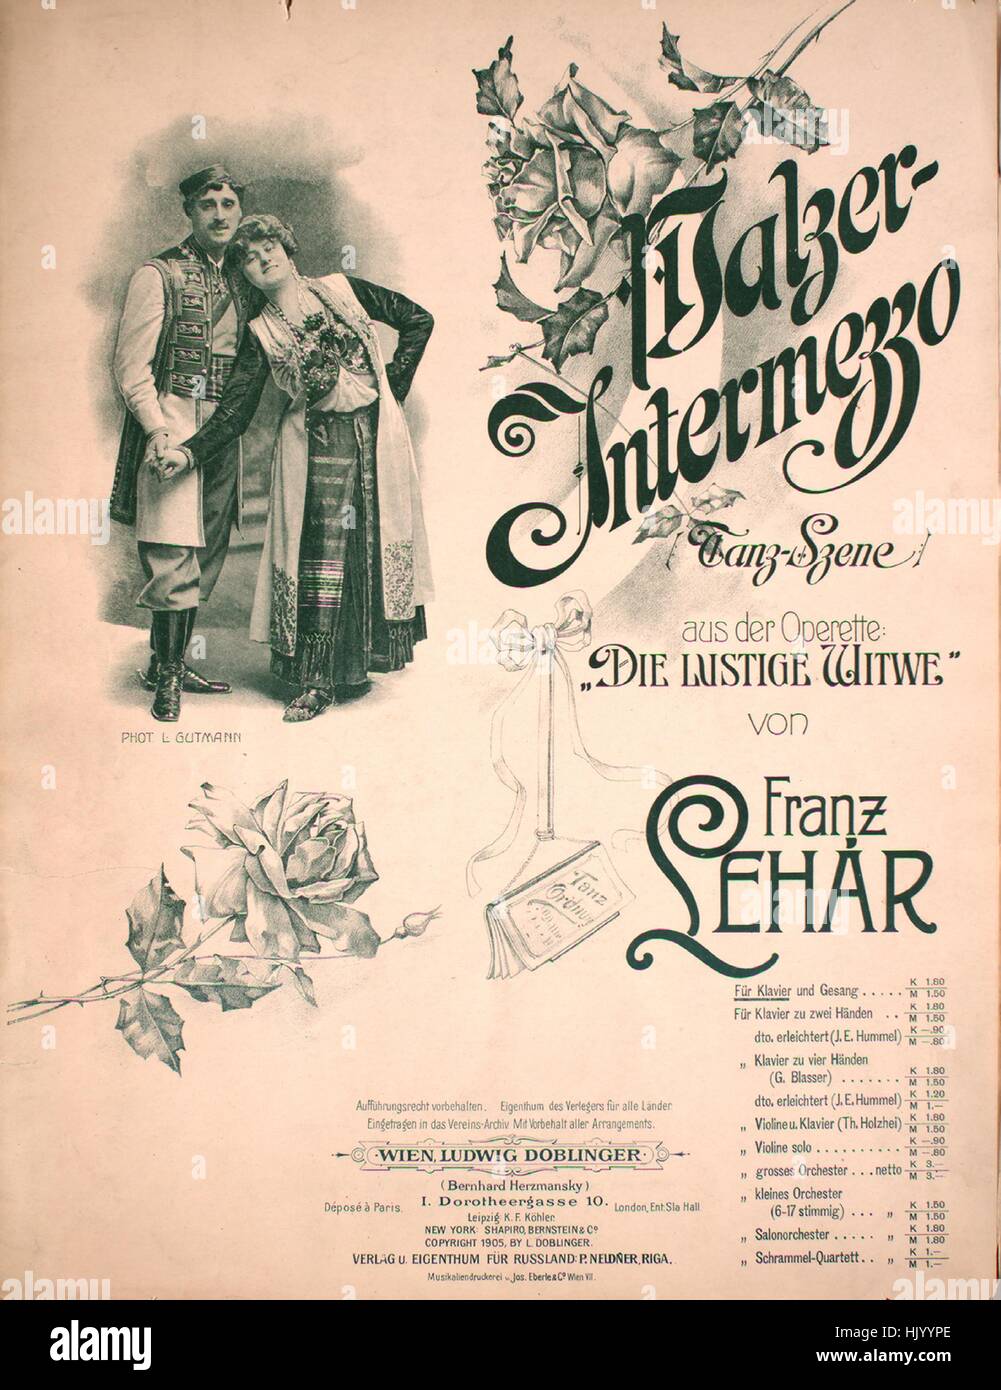 Sheet music cover image of the song 'Walzer-Intermezzo', with original authorship notes reading 'von Franz Lehar Text von Victor Leon und Leo Stein', 1905. The publisher is listed as 'Ludwig Doblinger (Bernhard Herzmansky)', the form of composition is 'sectional', the instrumentation is 'piano and voice', the first line reads 'Lippen schweigen, 's flustern Geigen', and the illustration artist is listed as 'photo by L. Gutmann of unidentified persons; Musikaliendruckerei v. Jos. Eberle and Co. Wien.'. Stock Photo